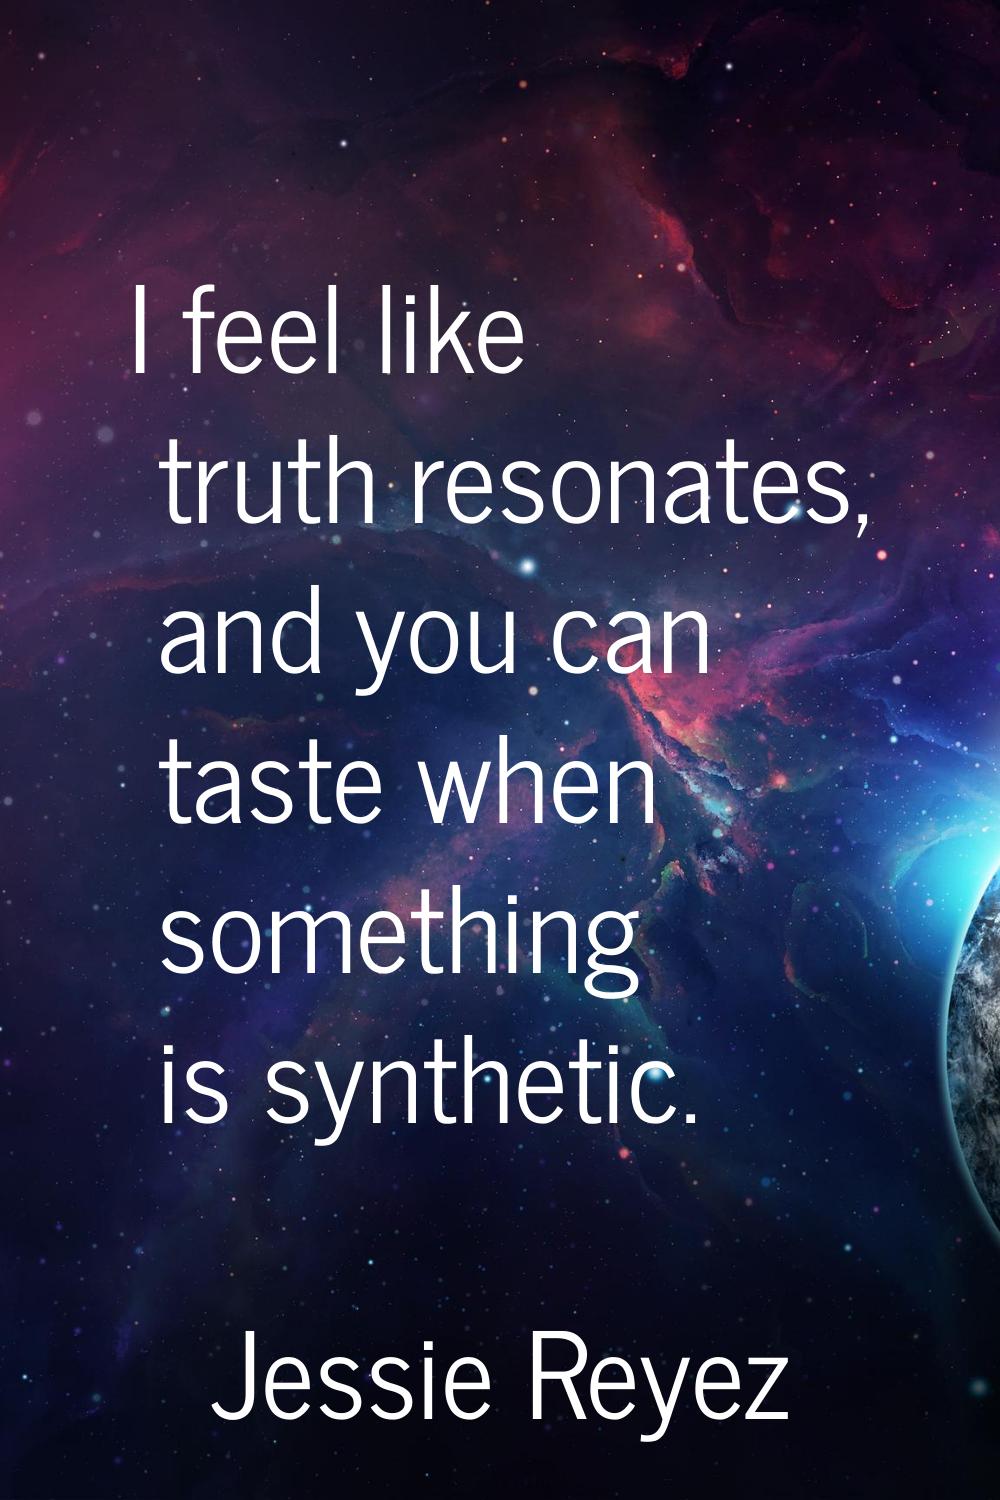 I feel like truth resonates, and you can taste when something is synthetic.